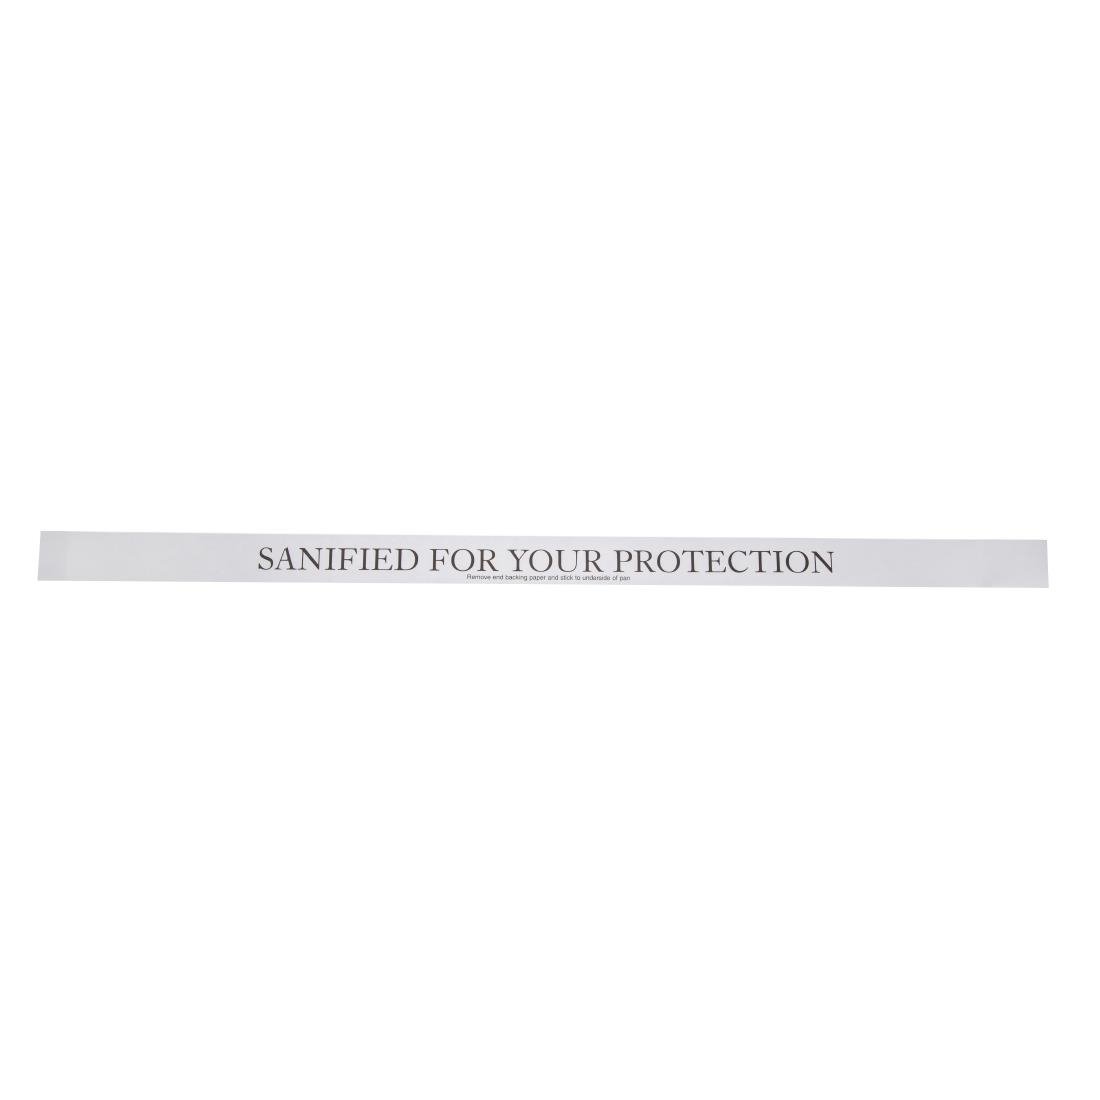 Sanified for your protection stickers (250 stuks)